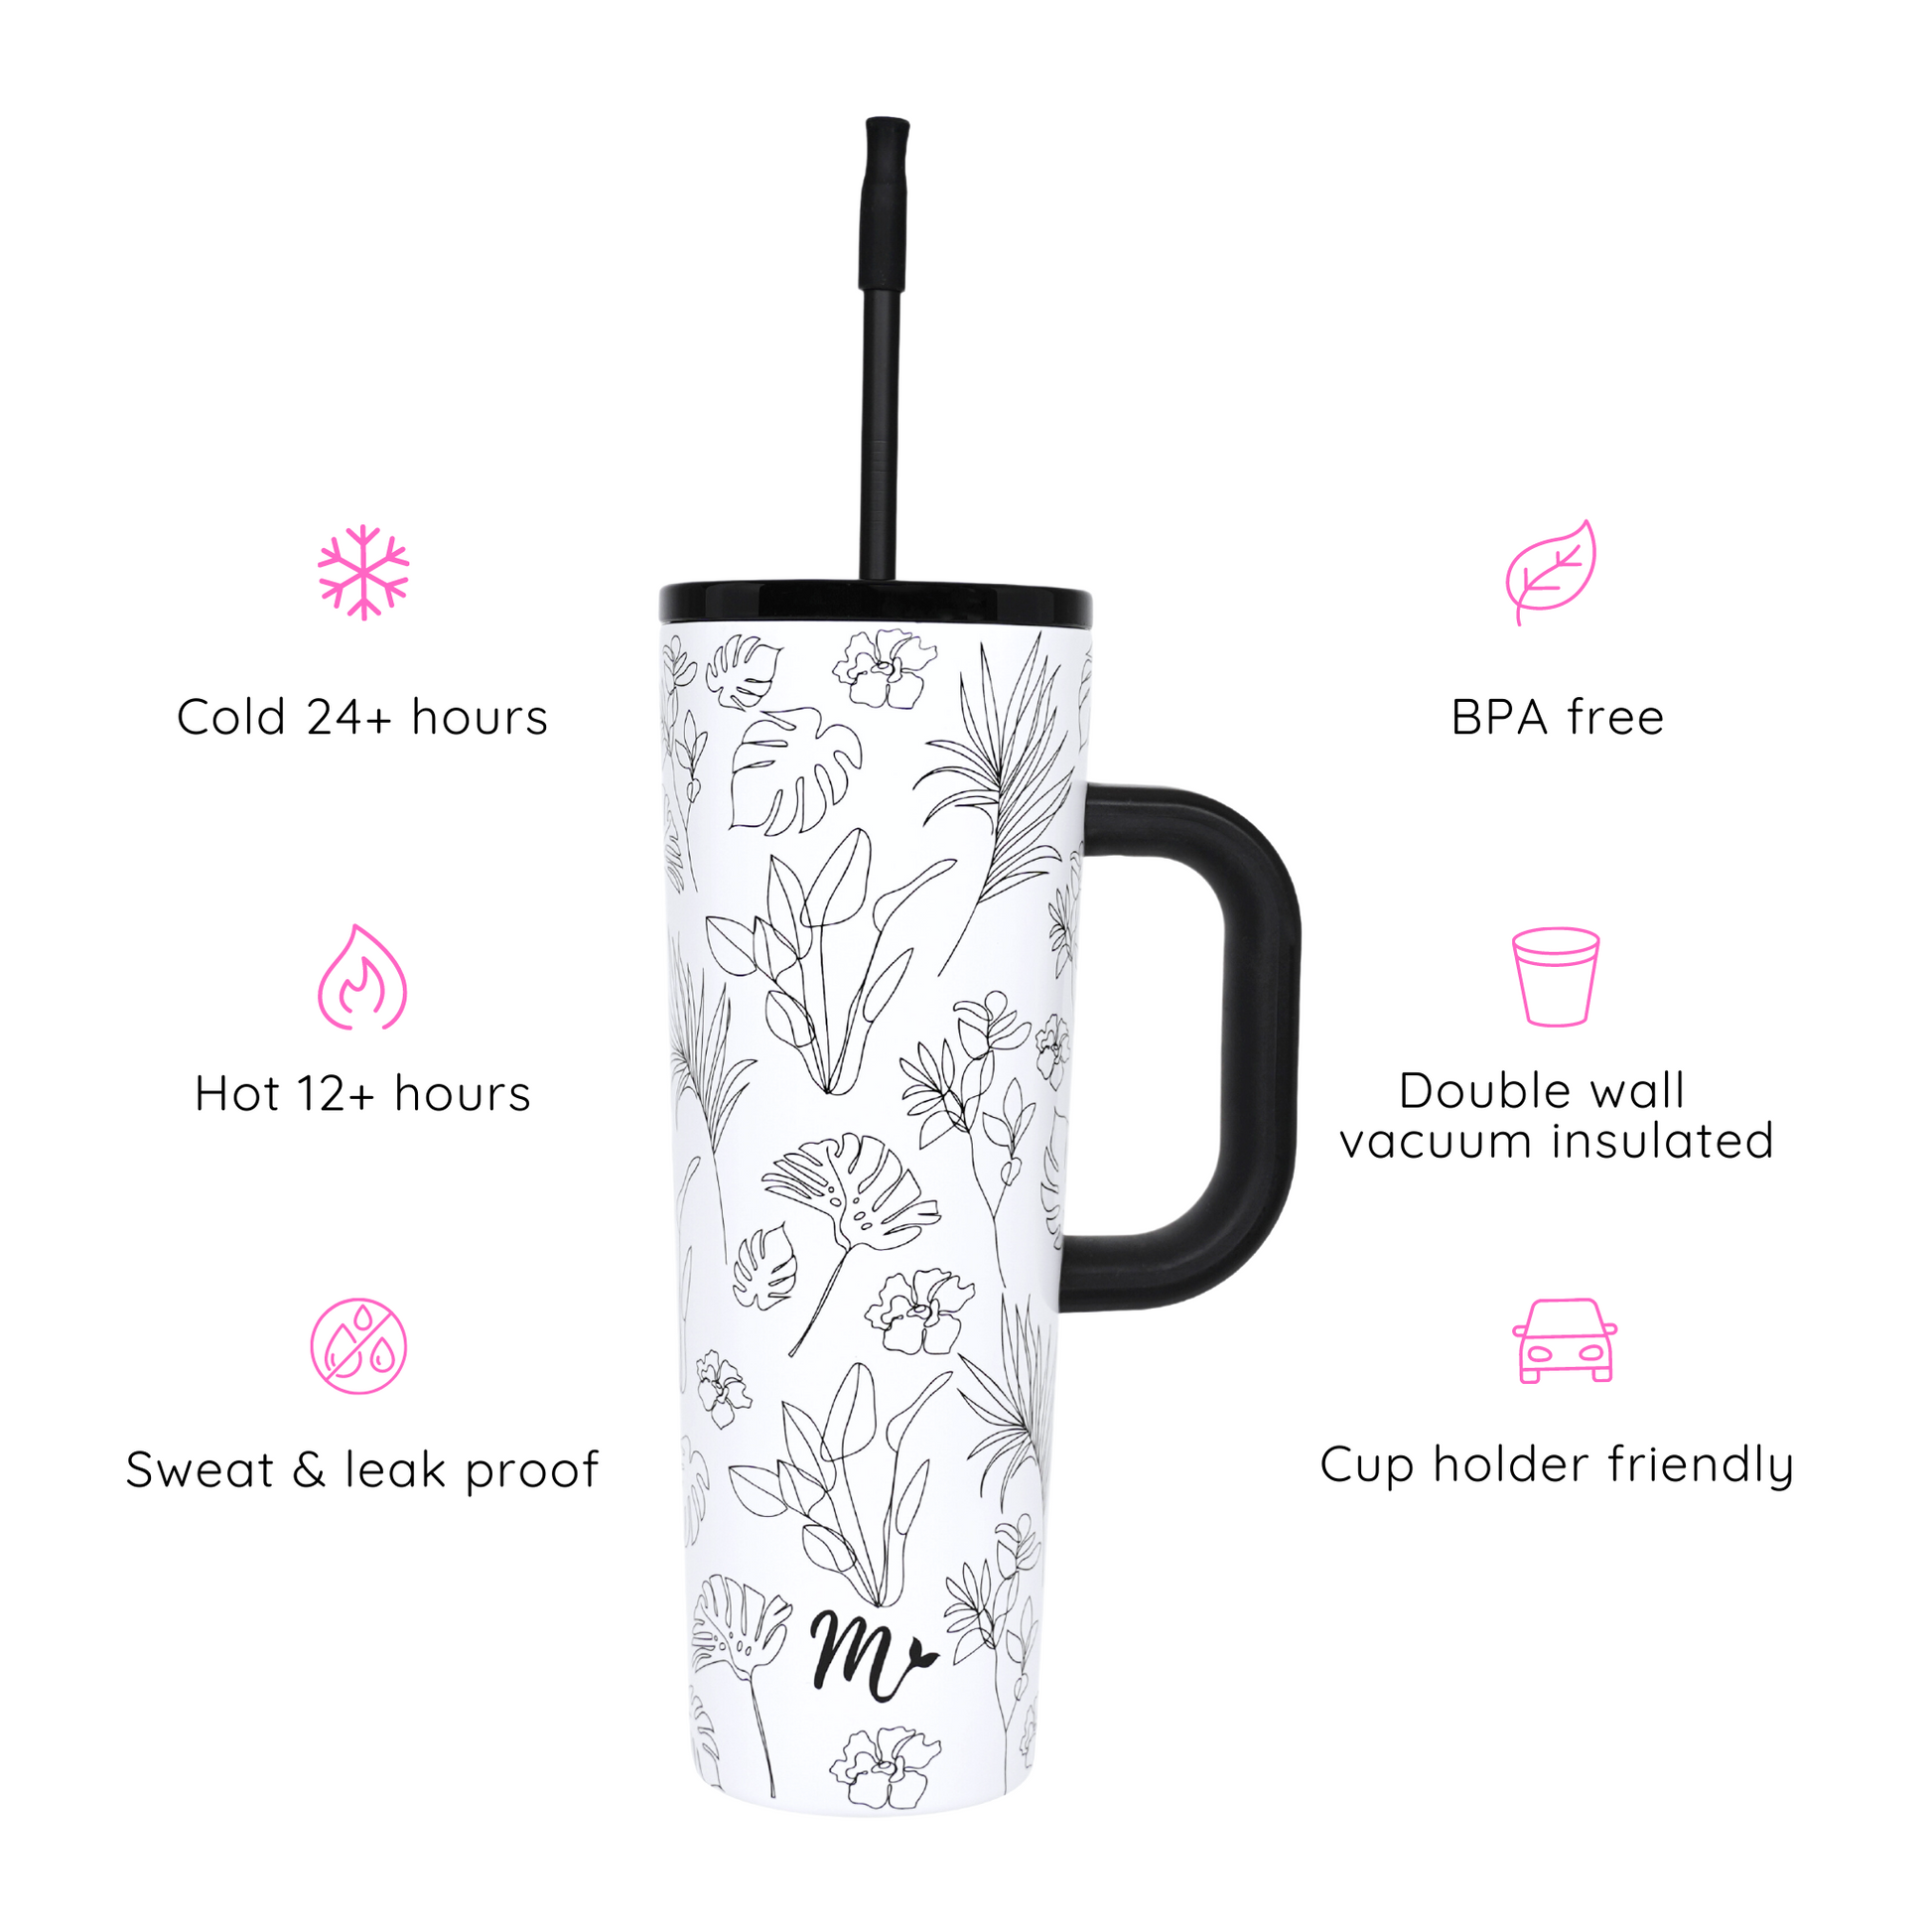 Reduce 40 oz Mug Tumbler, Stainless Steel with Handle - Keeps Drinks Cold  up to 34 Hours - Sweat Proof, Dishwasher Safe, BPA Free - Dark Web, Opaque  Gloss 